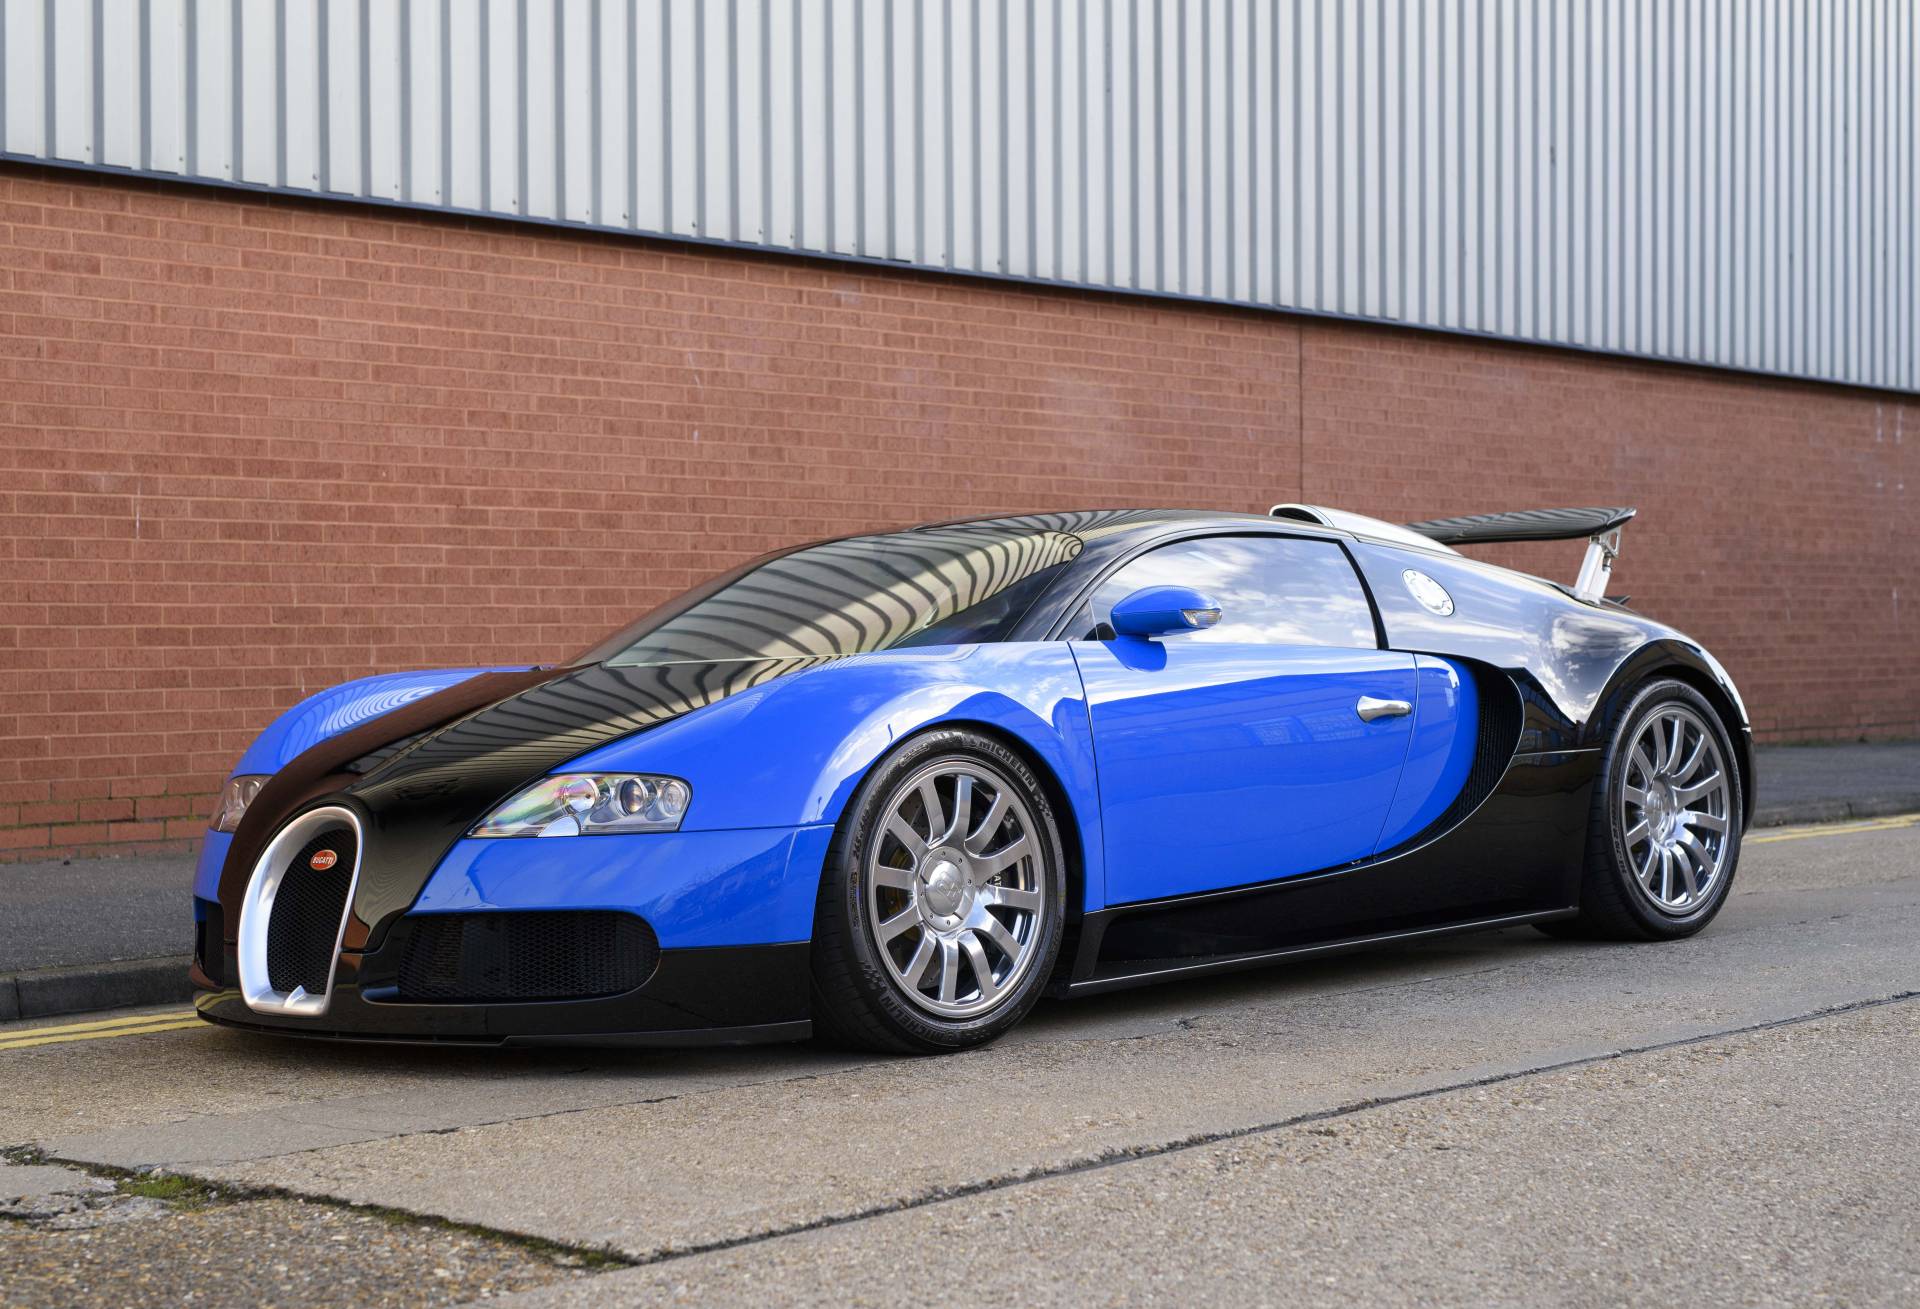 For Sale: Bugatti EB Veyron 16.4 (2007) offered for GBP 945,000